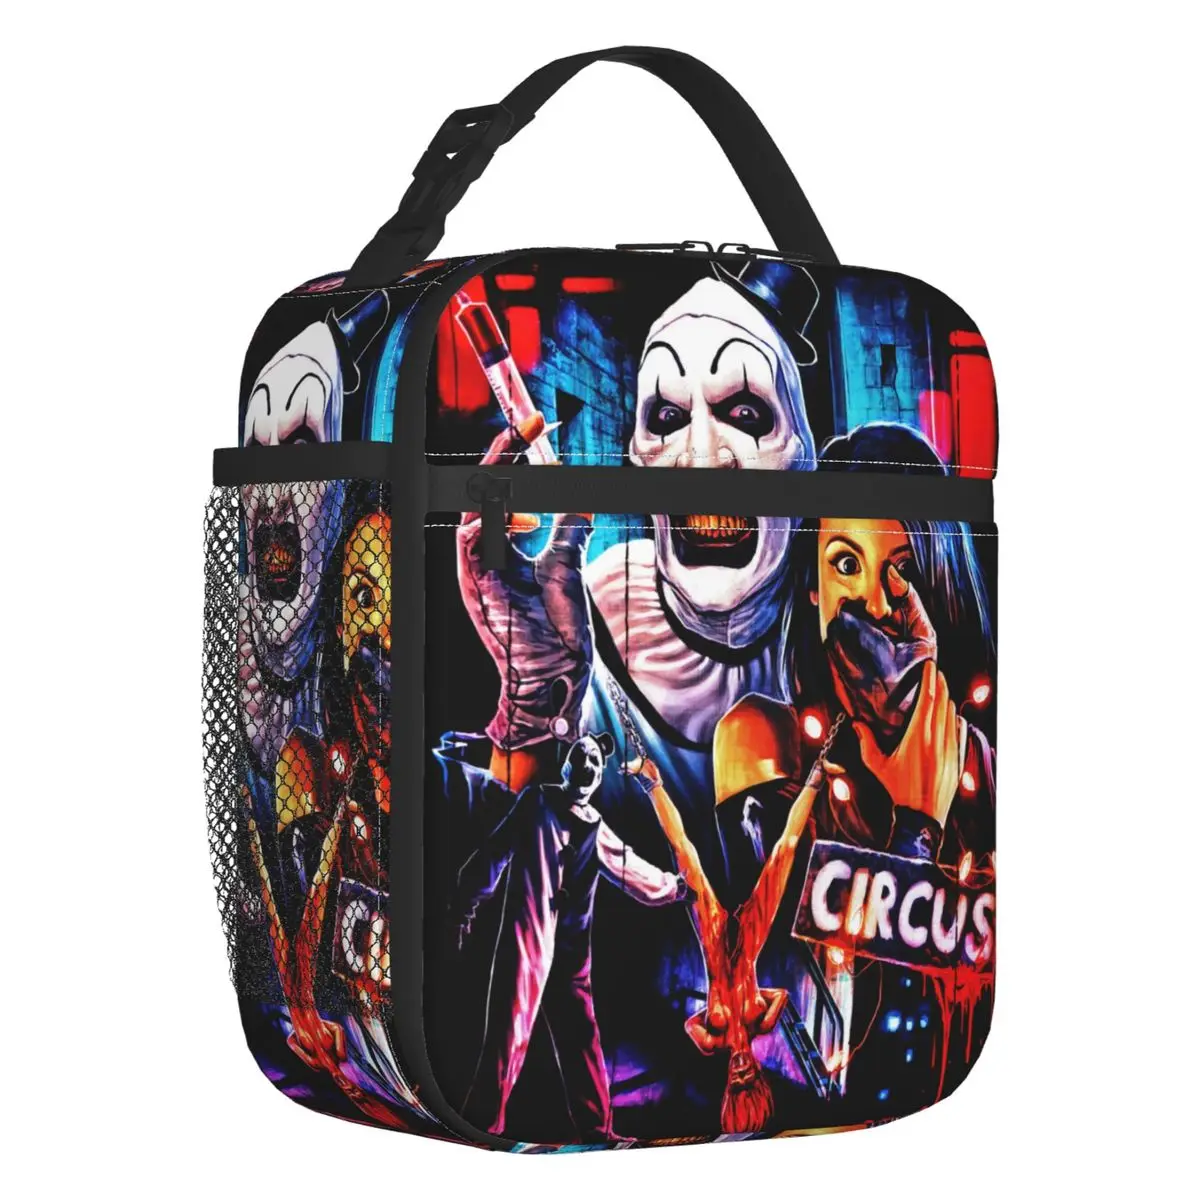 

Halloween Clown Horror Movie Terrifier Insulated Lunch Bags for Women Portable Thermal Cooler Bento Box Outdoor Camping Travel